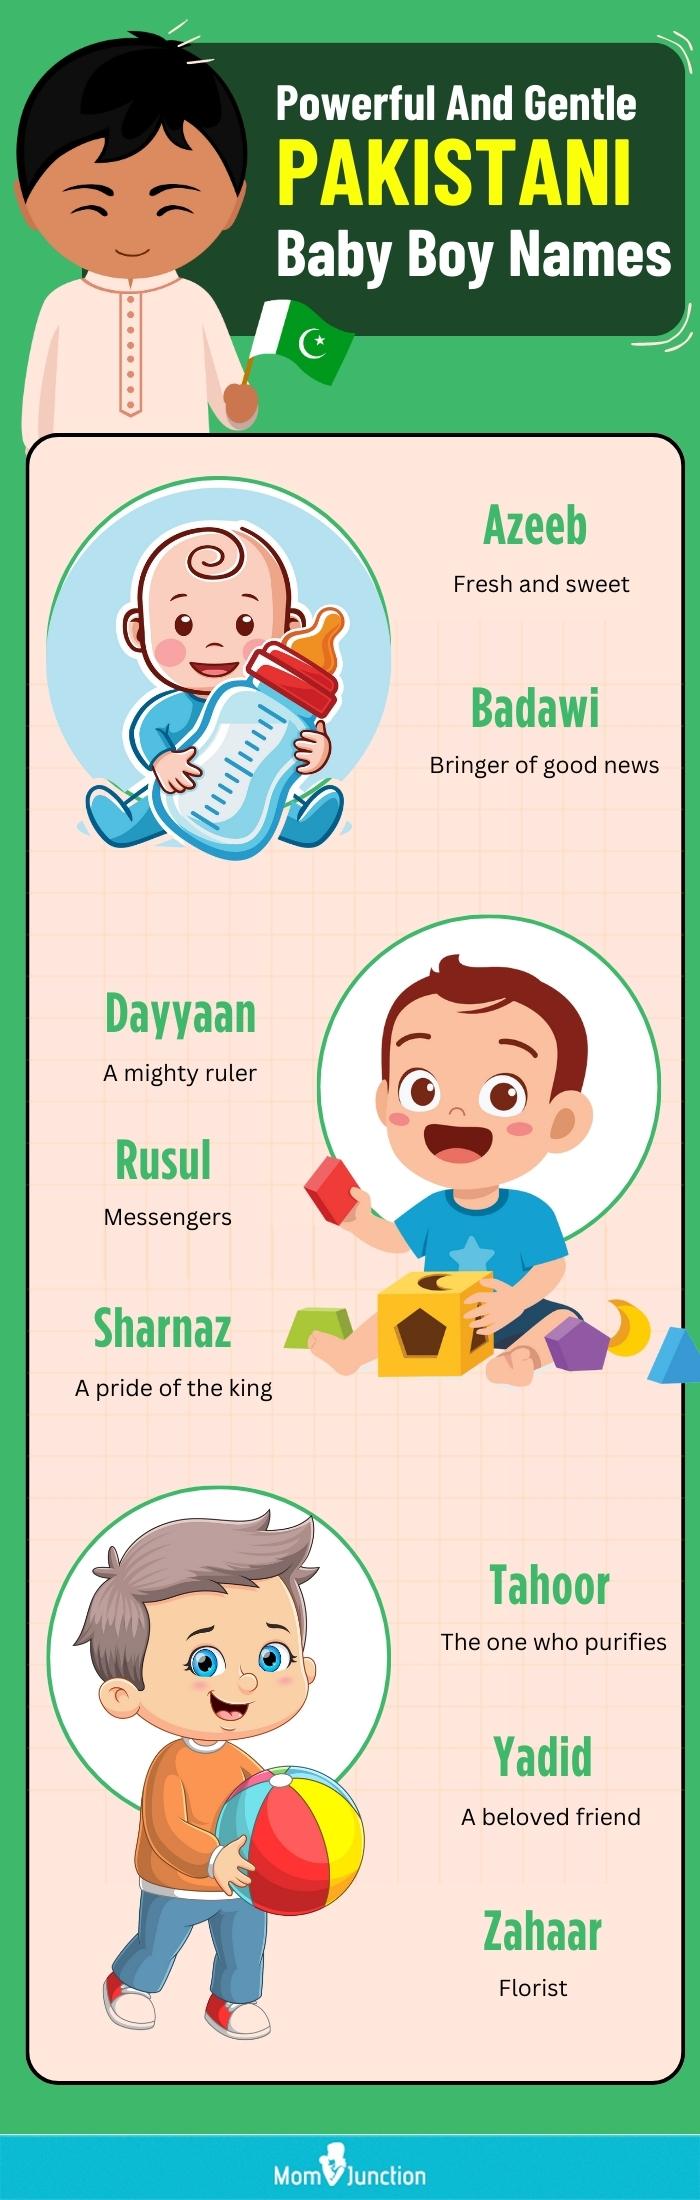 powerful and gentle pakistani baby boy names(infographic)